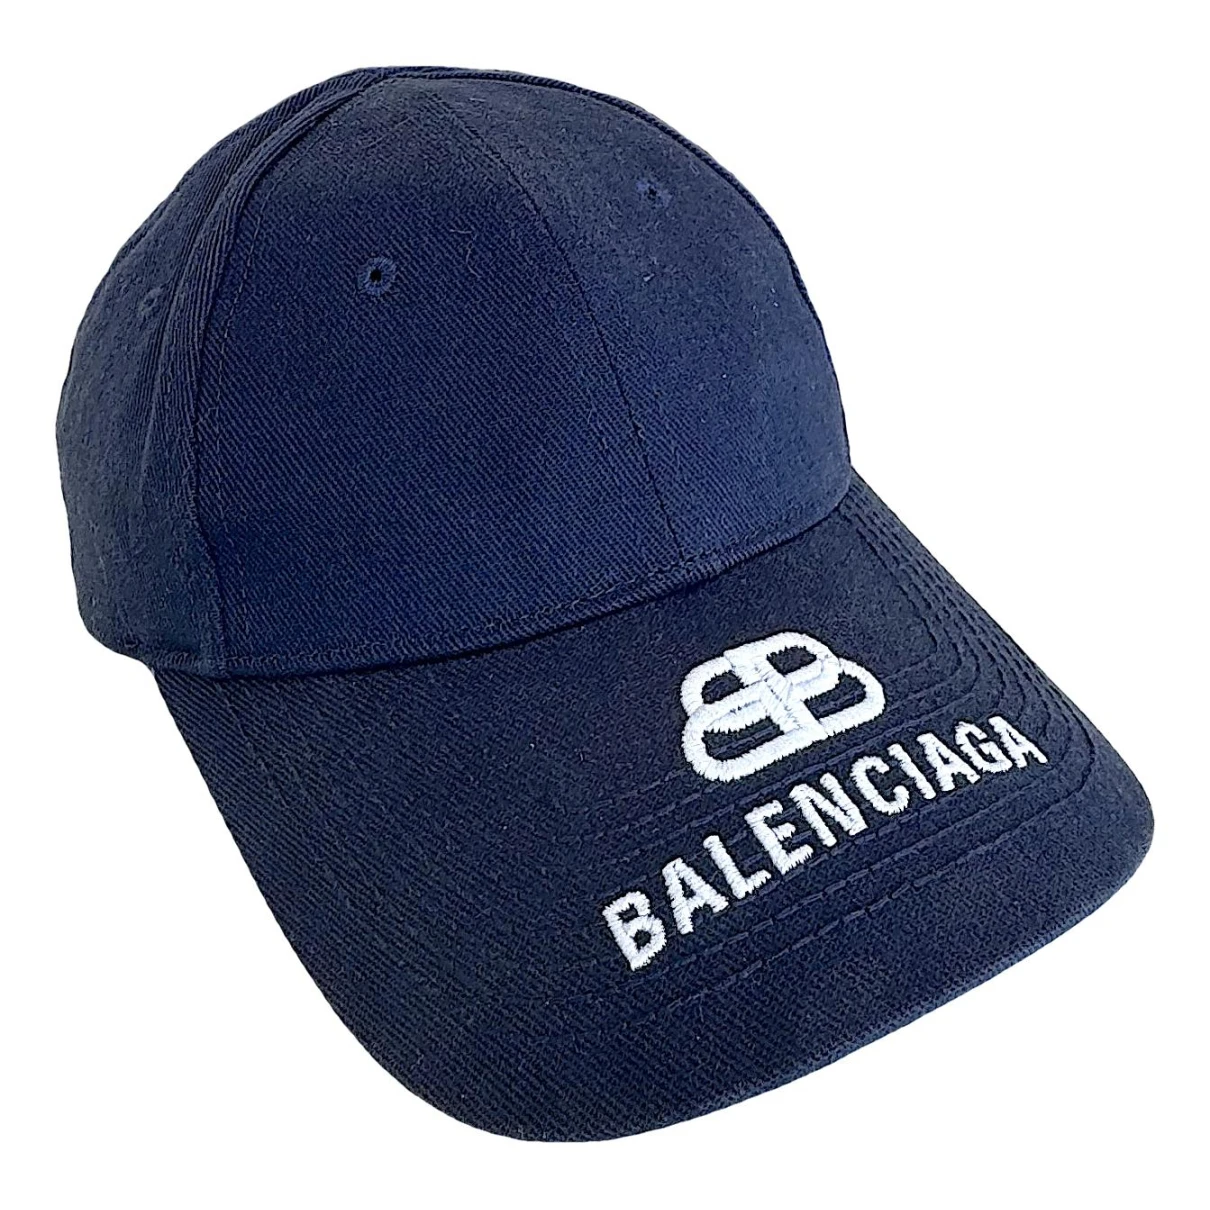 Pre-owned Balenciaga Hat In Blue